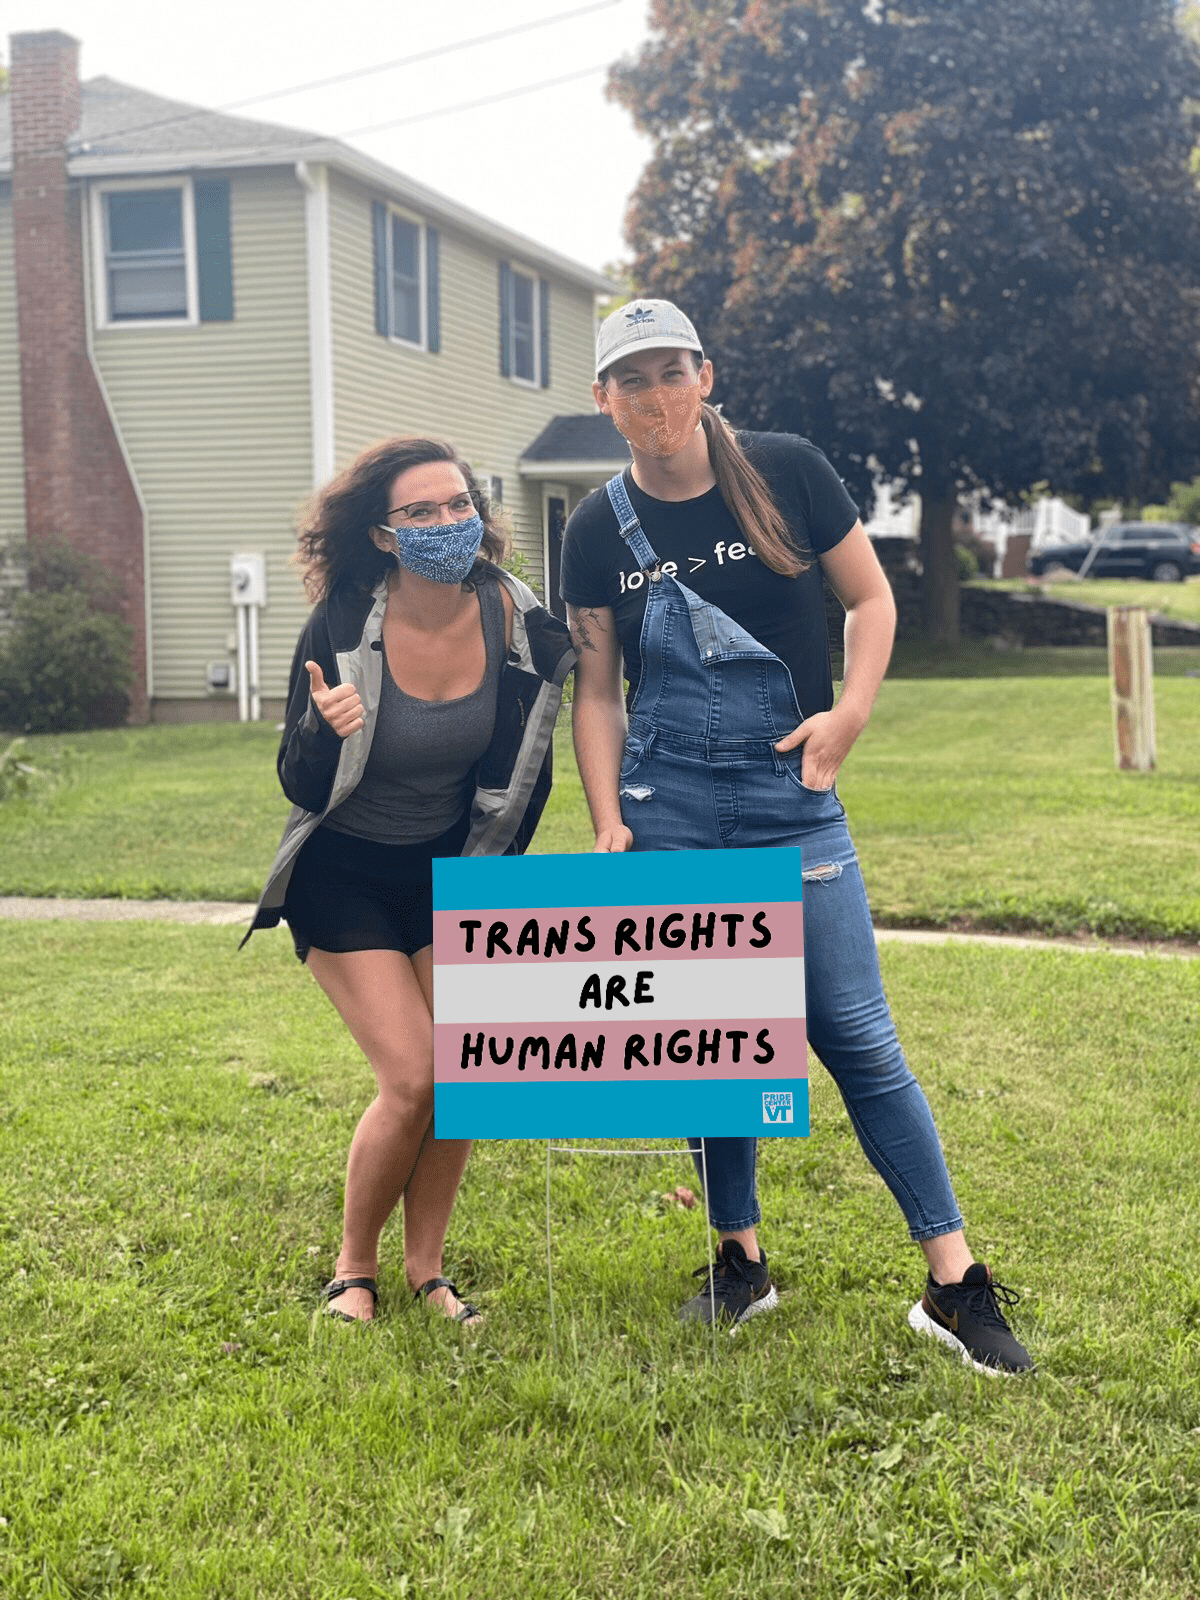 Two people stand with a yard sign that reads "Trans Rights are Human Rights"